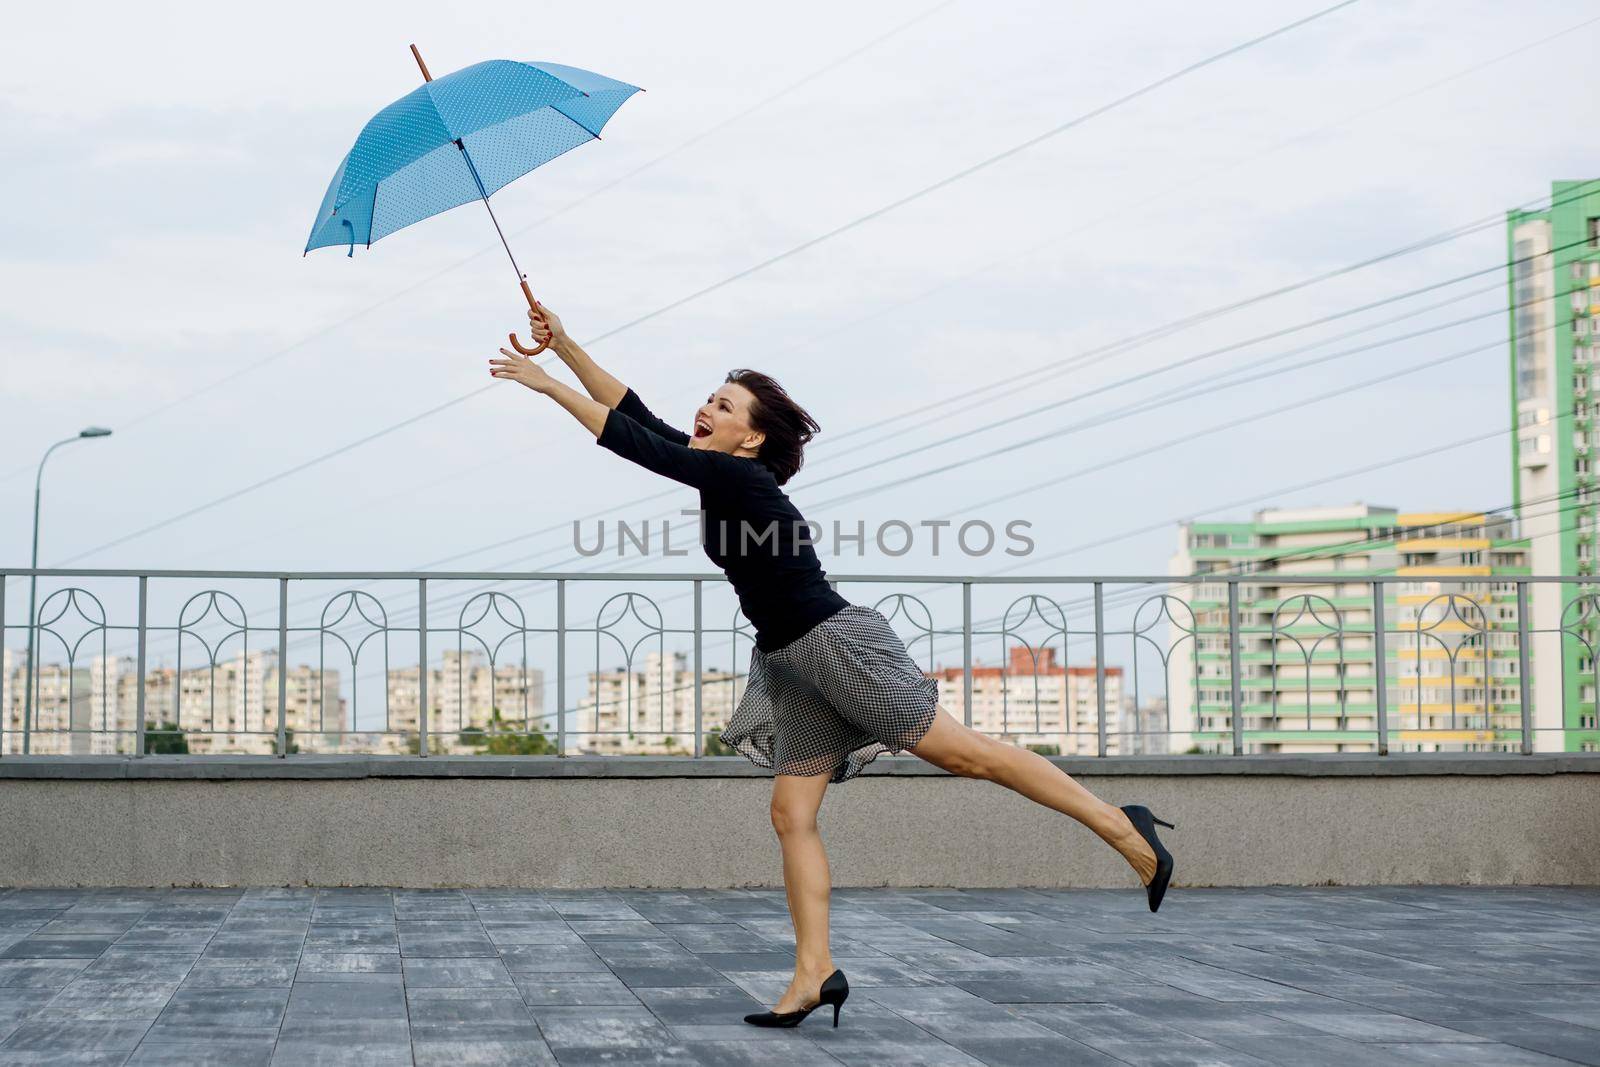 Female runs behind an umbrella against the backdrop of the city